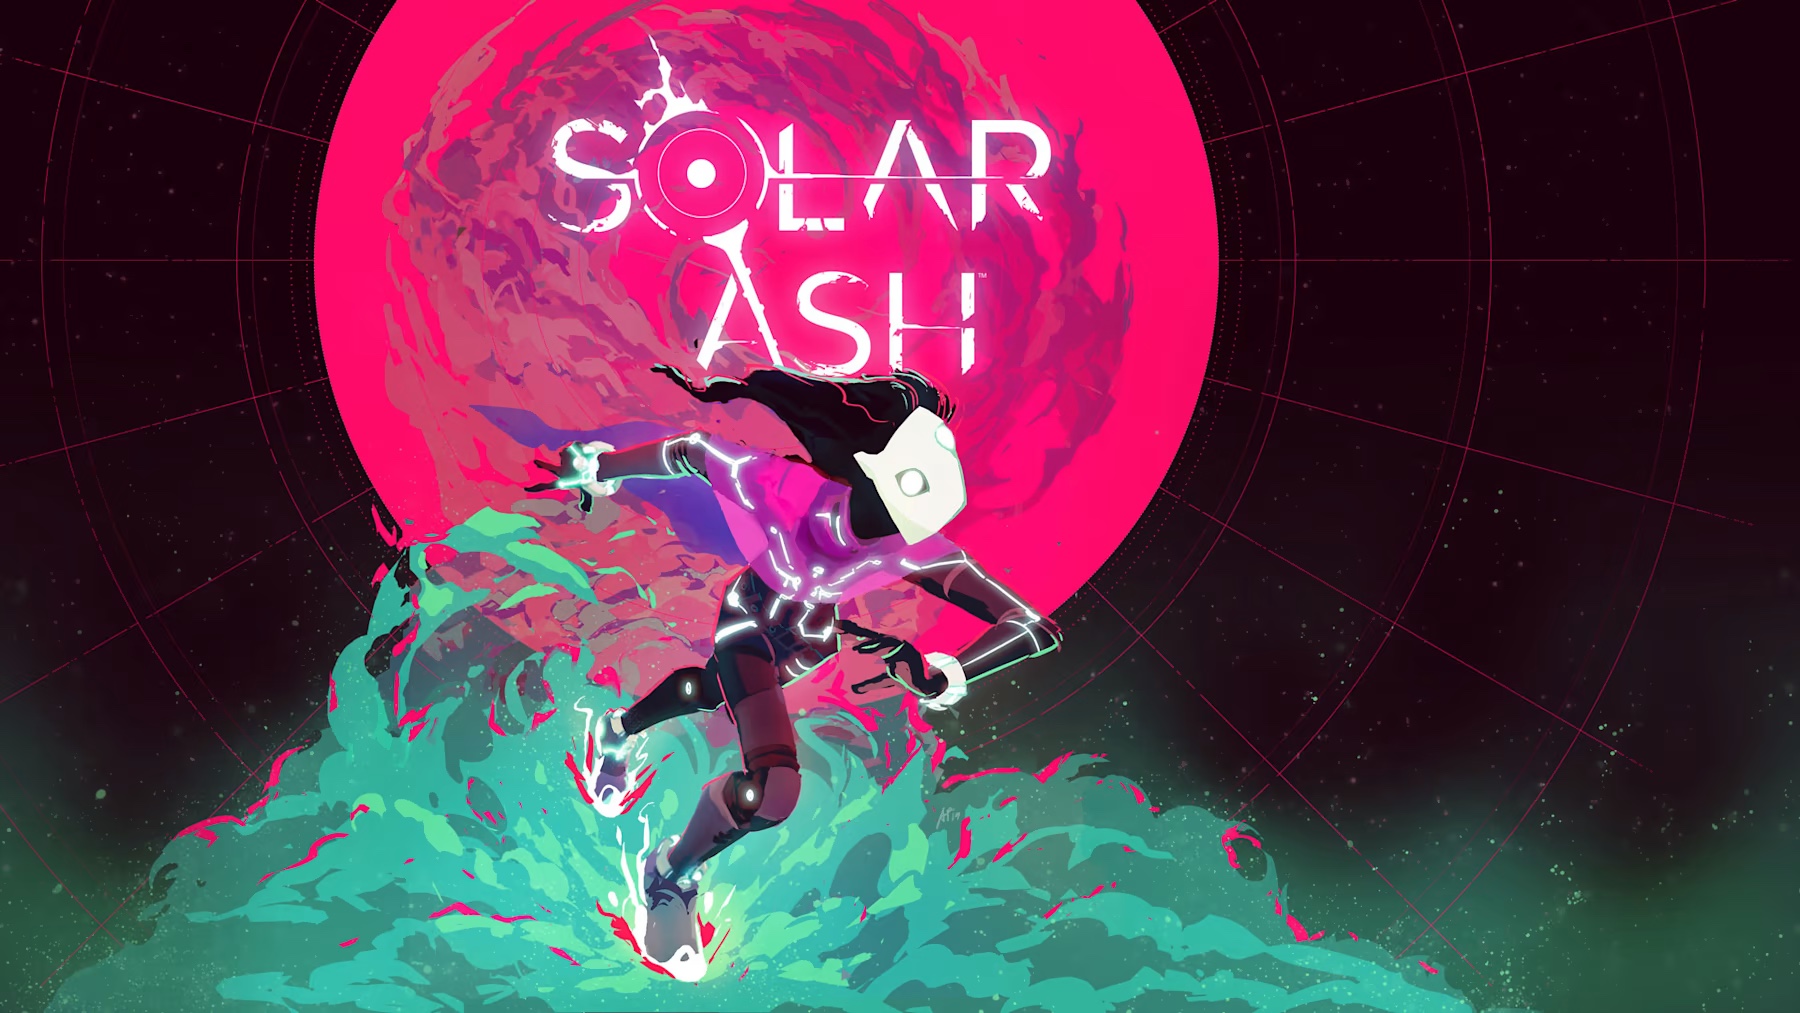 Reviews Featuring ‘Solar Ash’ & ‘Mon-Yu’, Plus the Latest Releases and Sales – TouchArcade